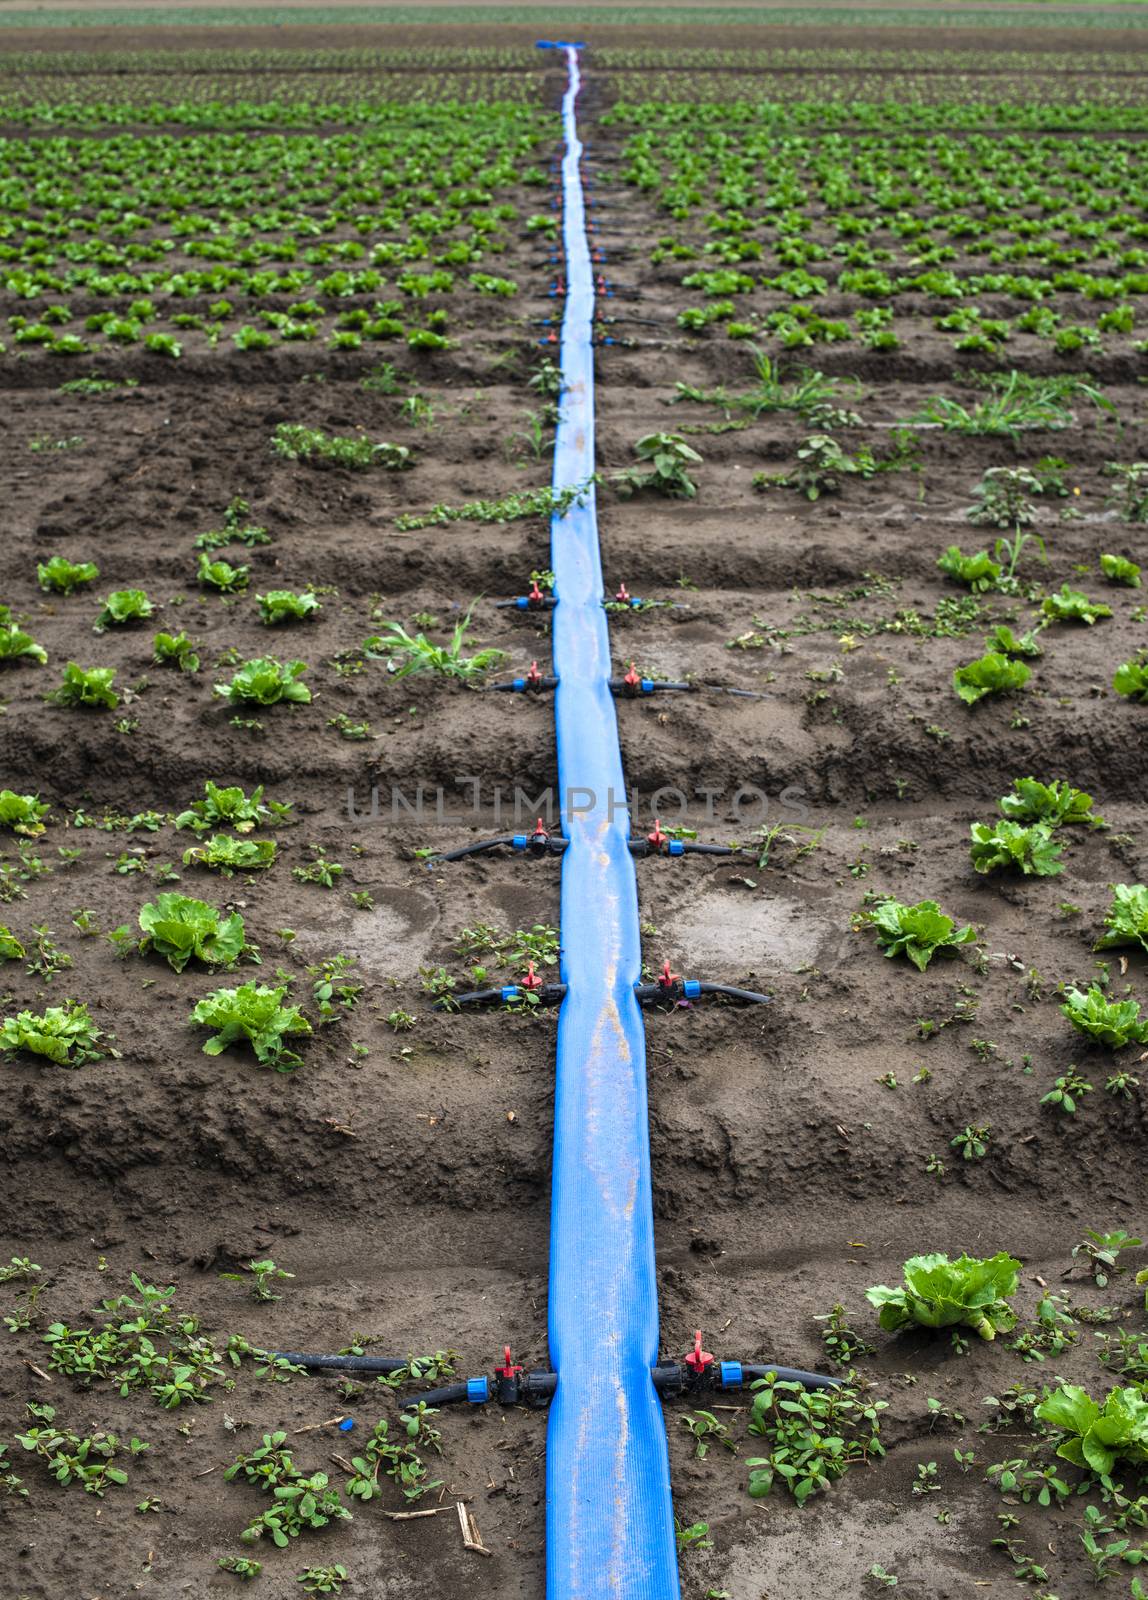 Planted agriculture land and pipe for watering. Iceberg lettuce plants.